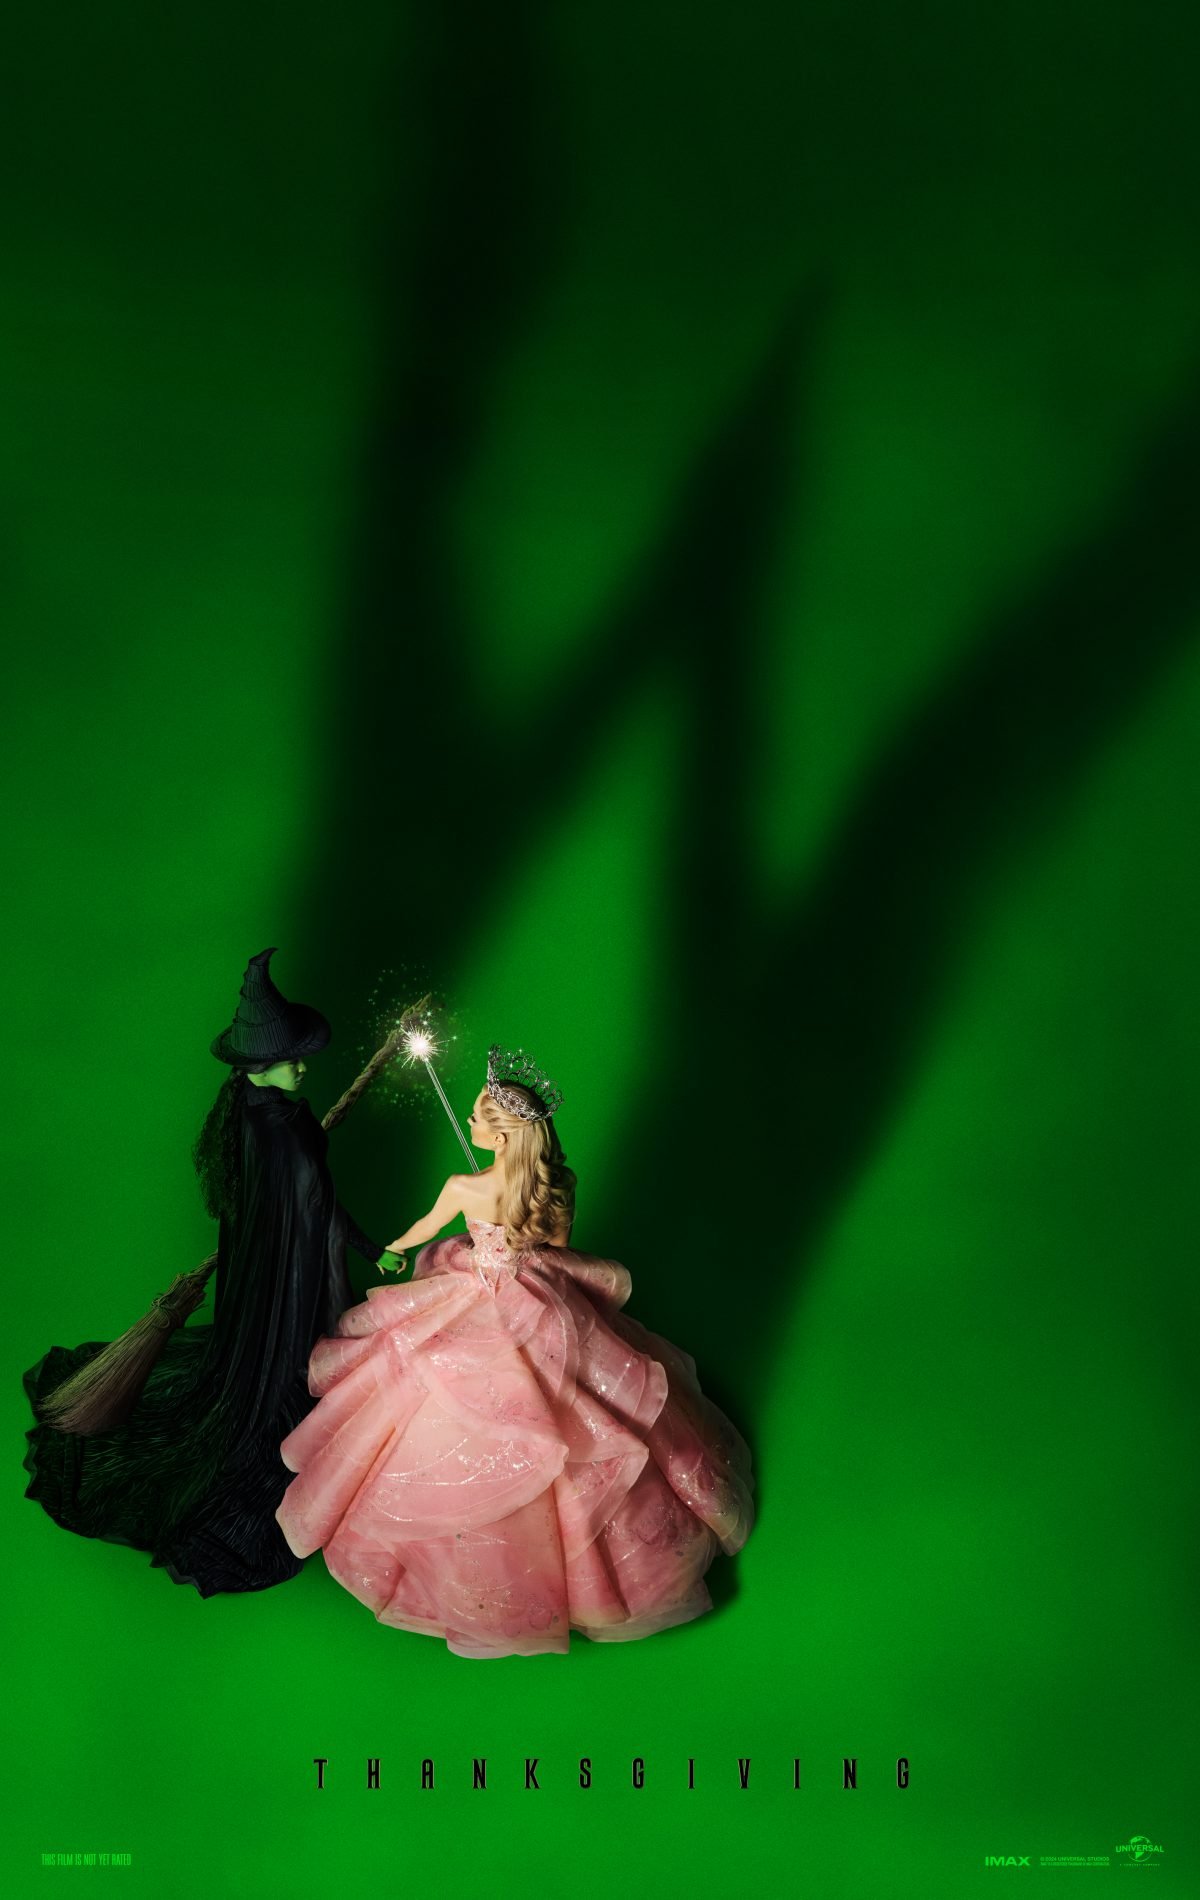 Elphaba and Glinda on a green background in the poster for Wicked, released with the Wicked trailer